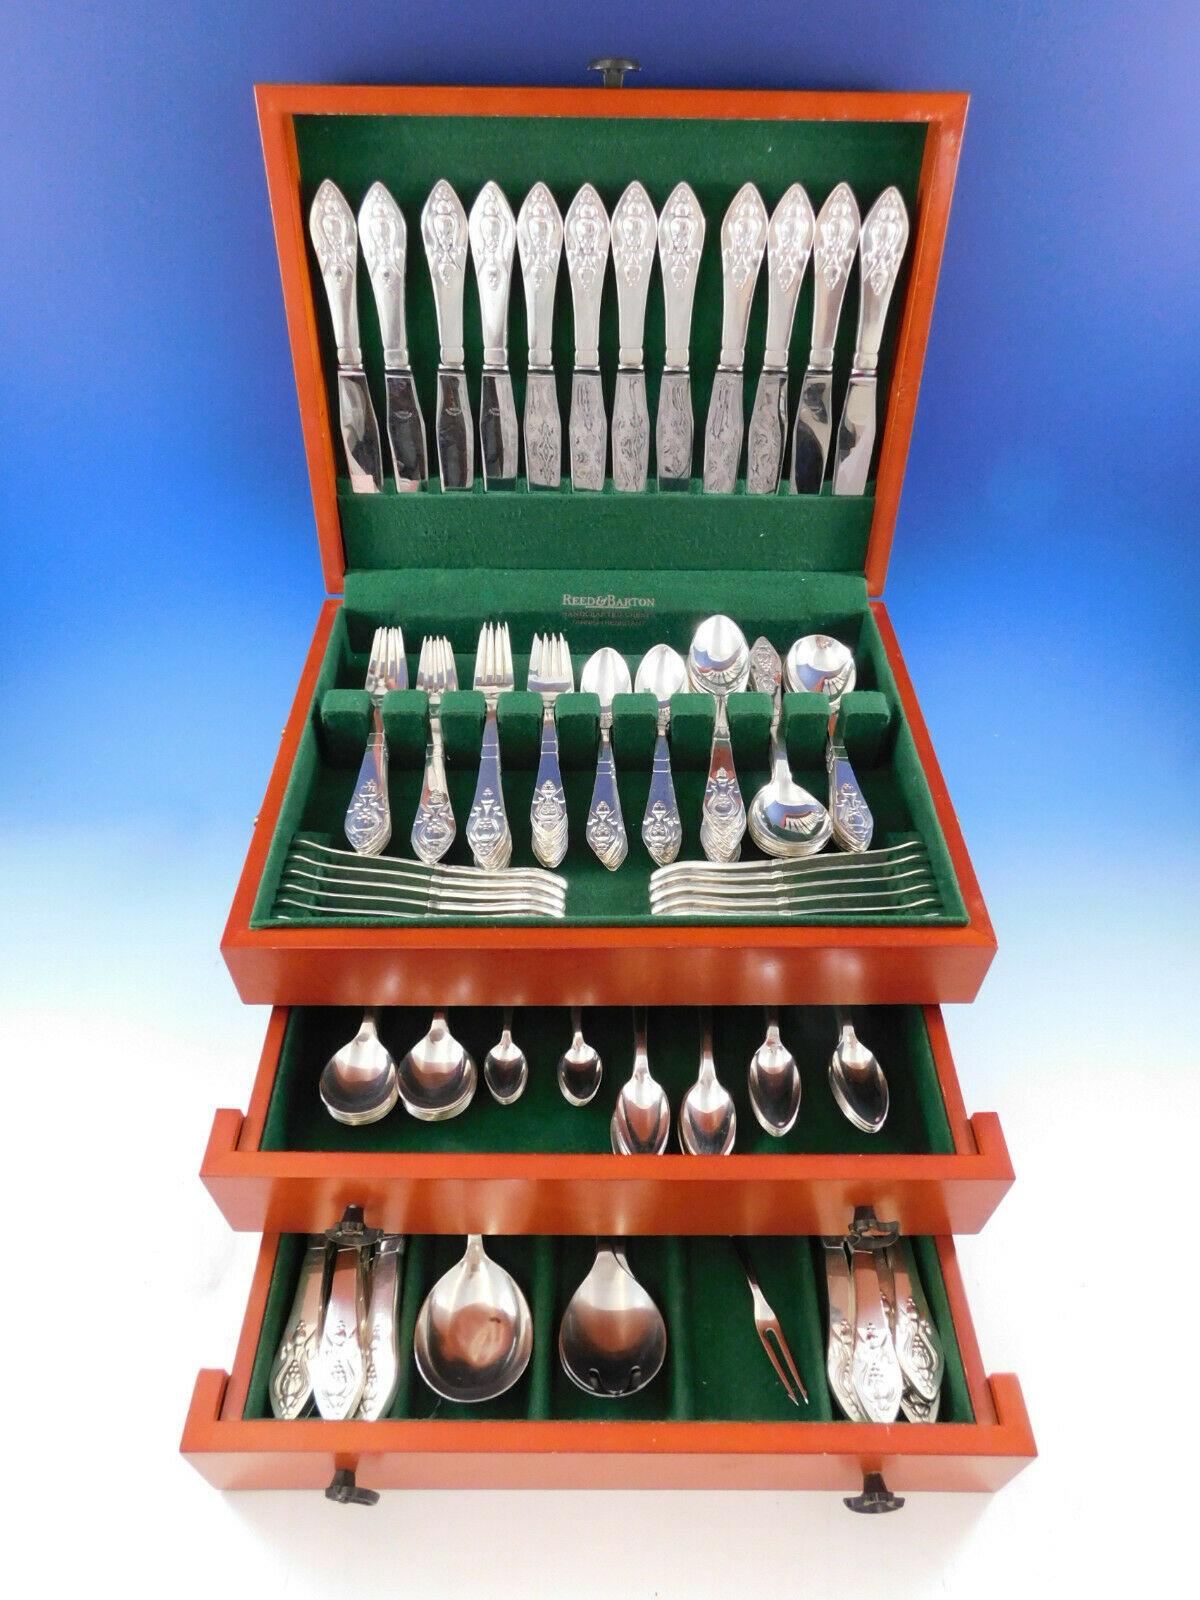 Superb Fuchsia Aka Klokke by Georg Jensen Sterling Silver flatware set, 160 pieces. This exceptionally rare set includes:

12 dinner size knives, 9 1/2